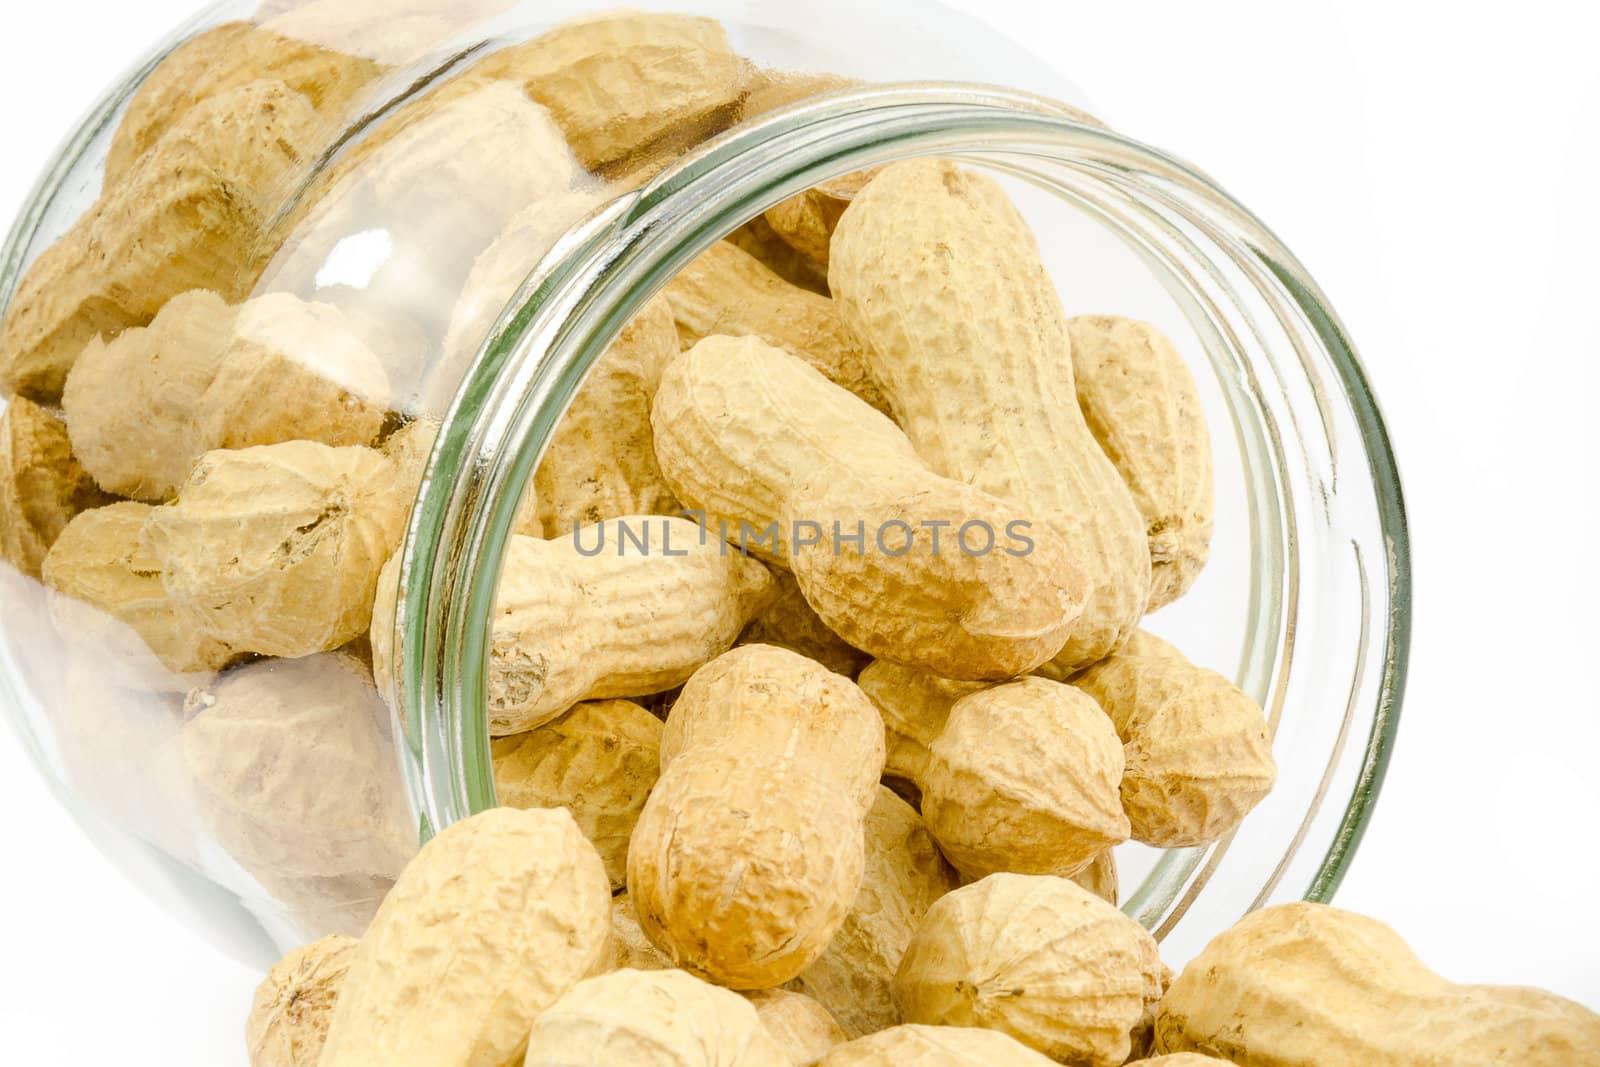 Close up of a glass jar full of unpeeled peanuts on a white background